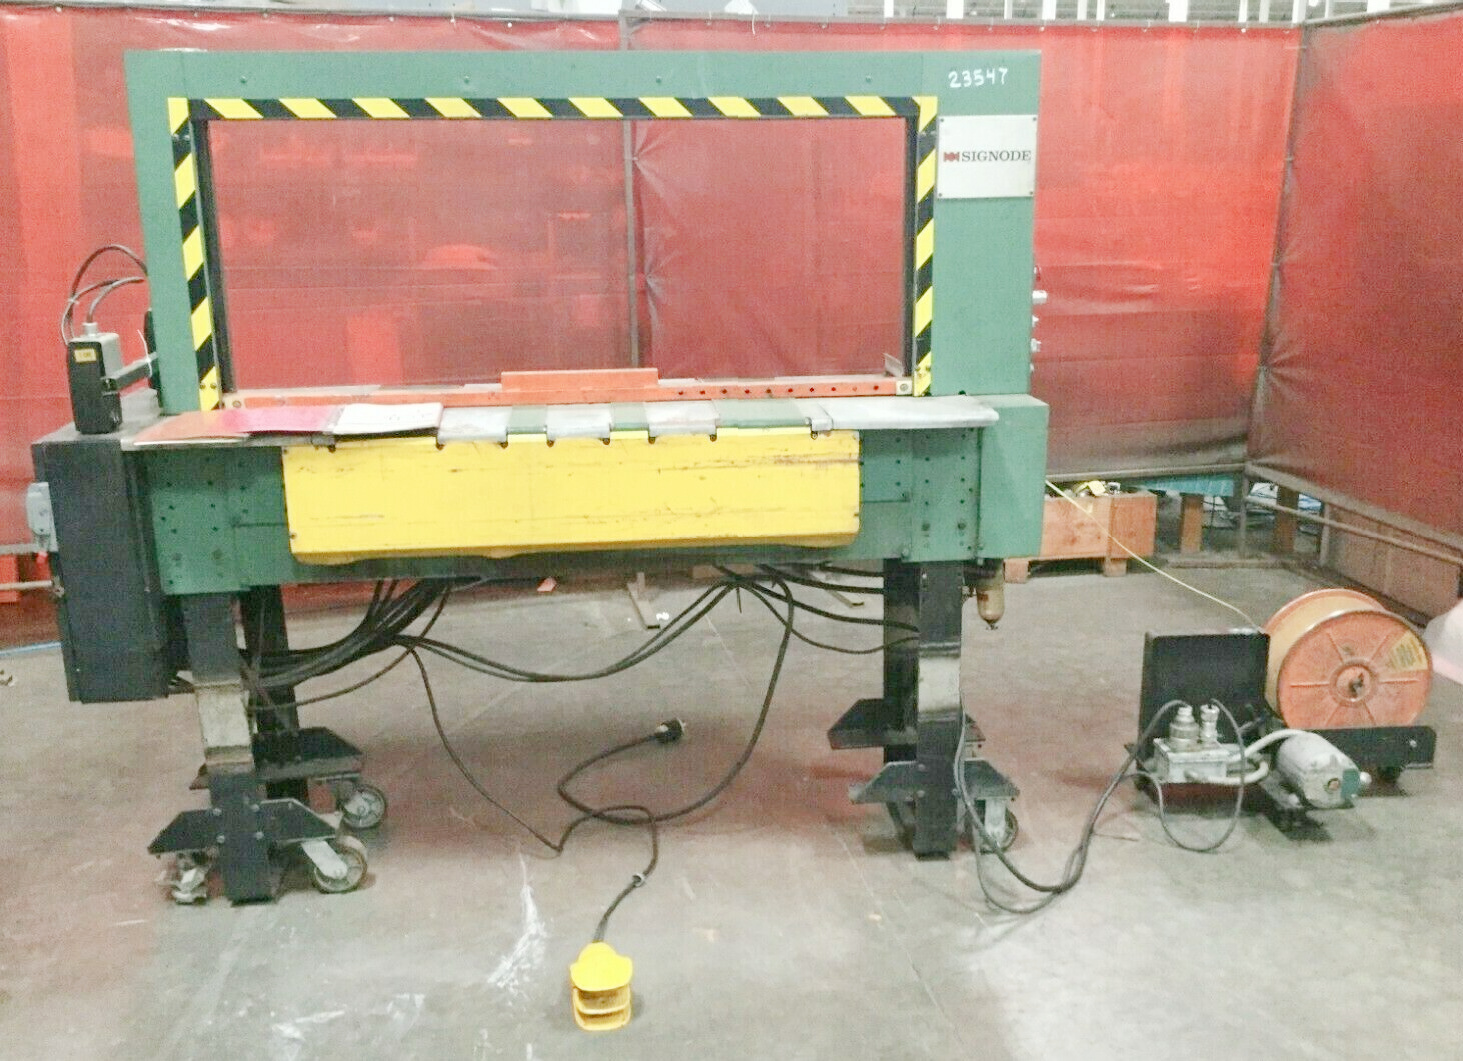 Signode Automatic Power Strapping Machine (used) Item # UE-072821D(North Carolina)